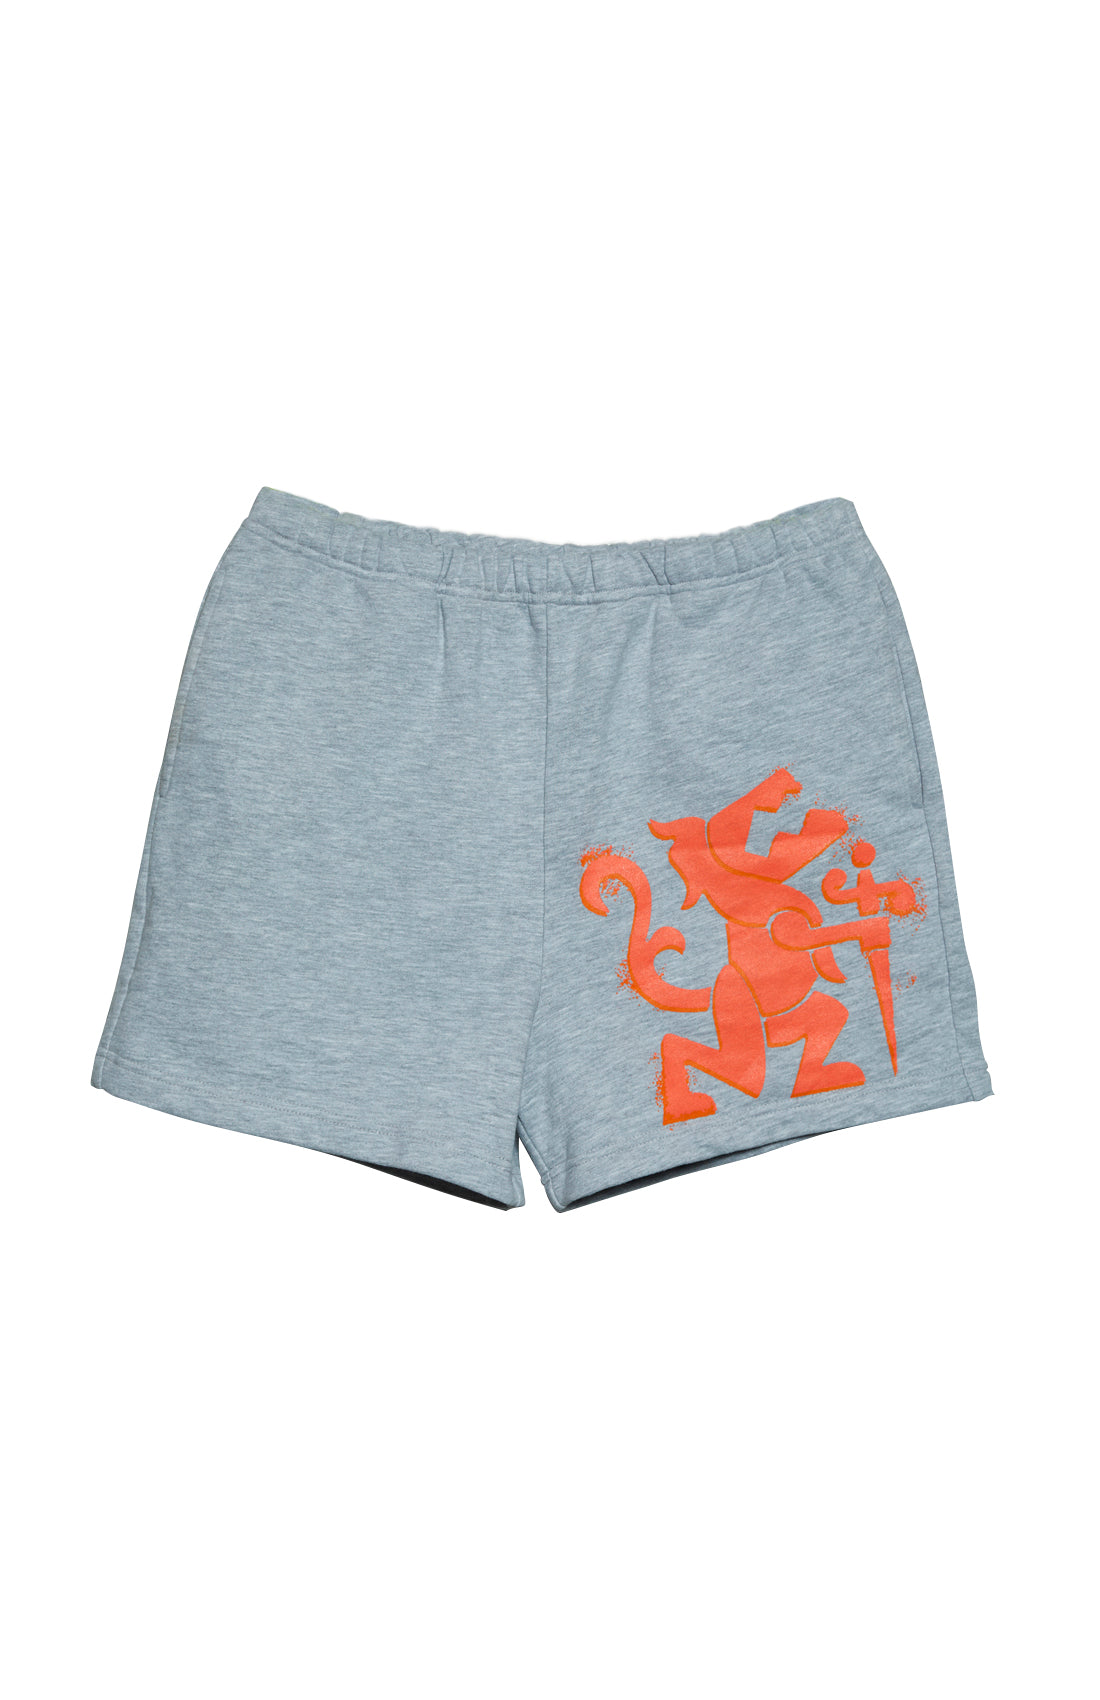 Monsters DYNASTY Grey Shorts